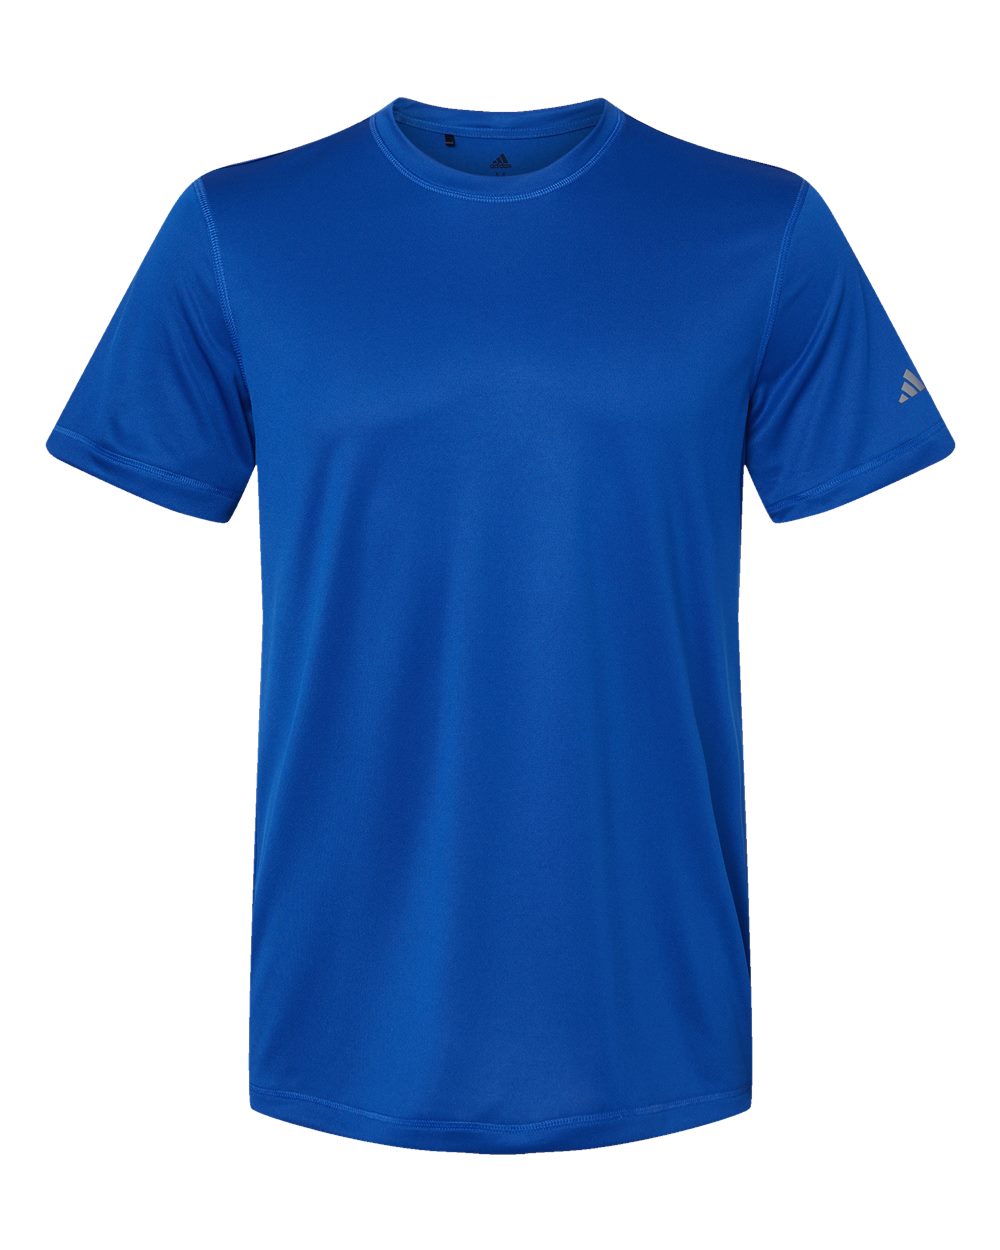 Adidas Mens Blank Short Sleeve Polyester Sport T-Shirt A376 up to 4XL ...